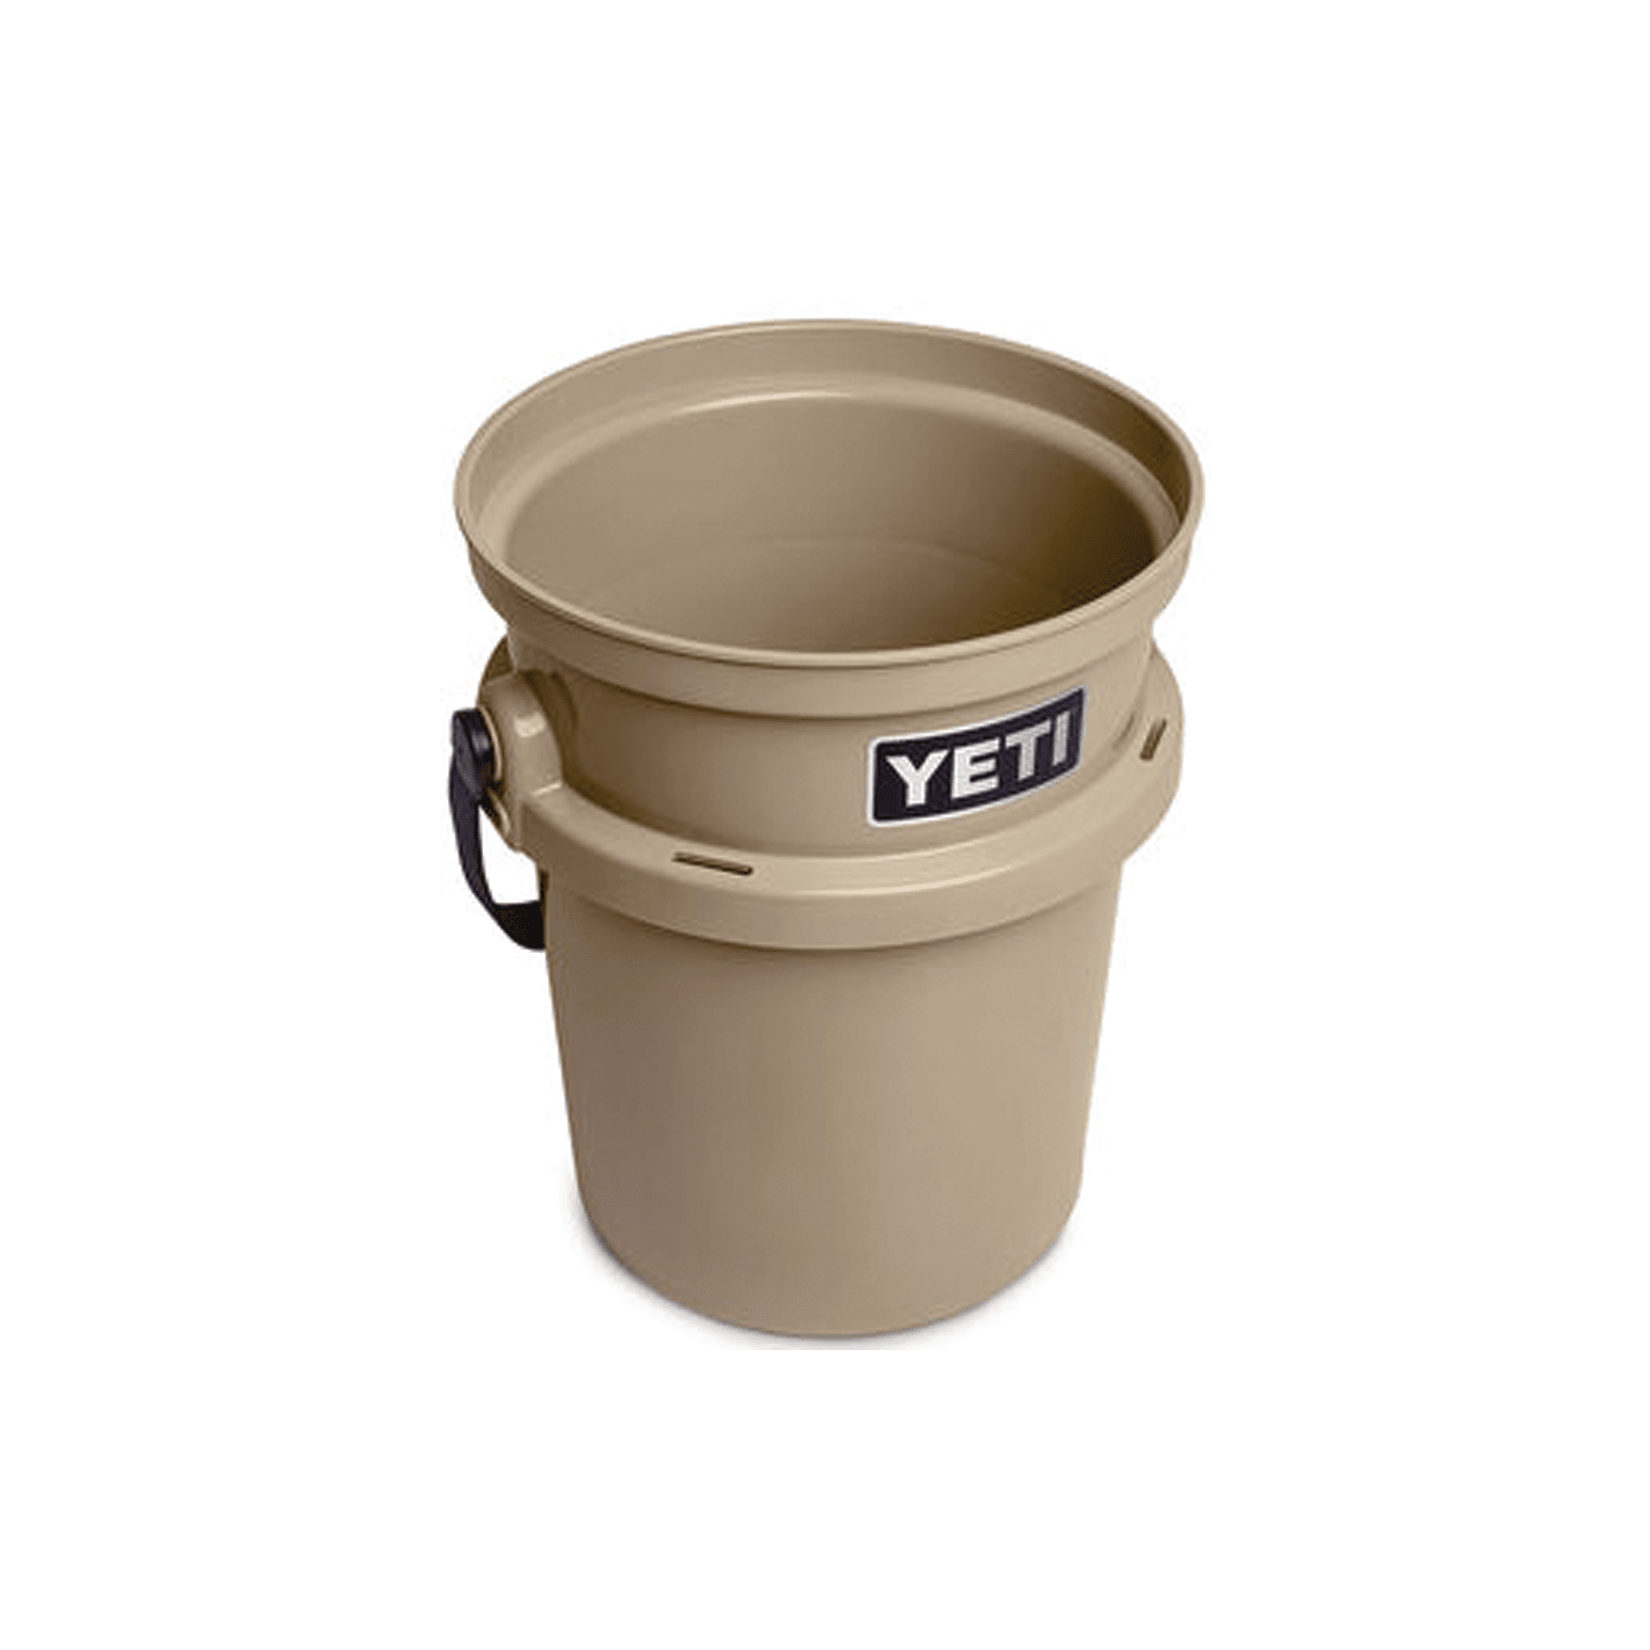 Yeti Coolers LOADOUT BUCKET WH